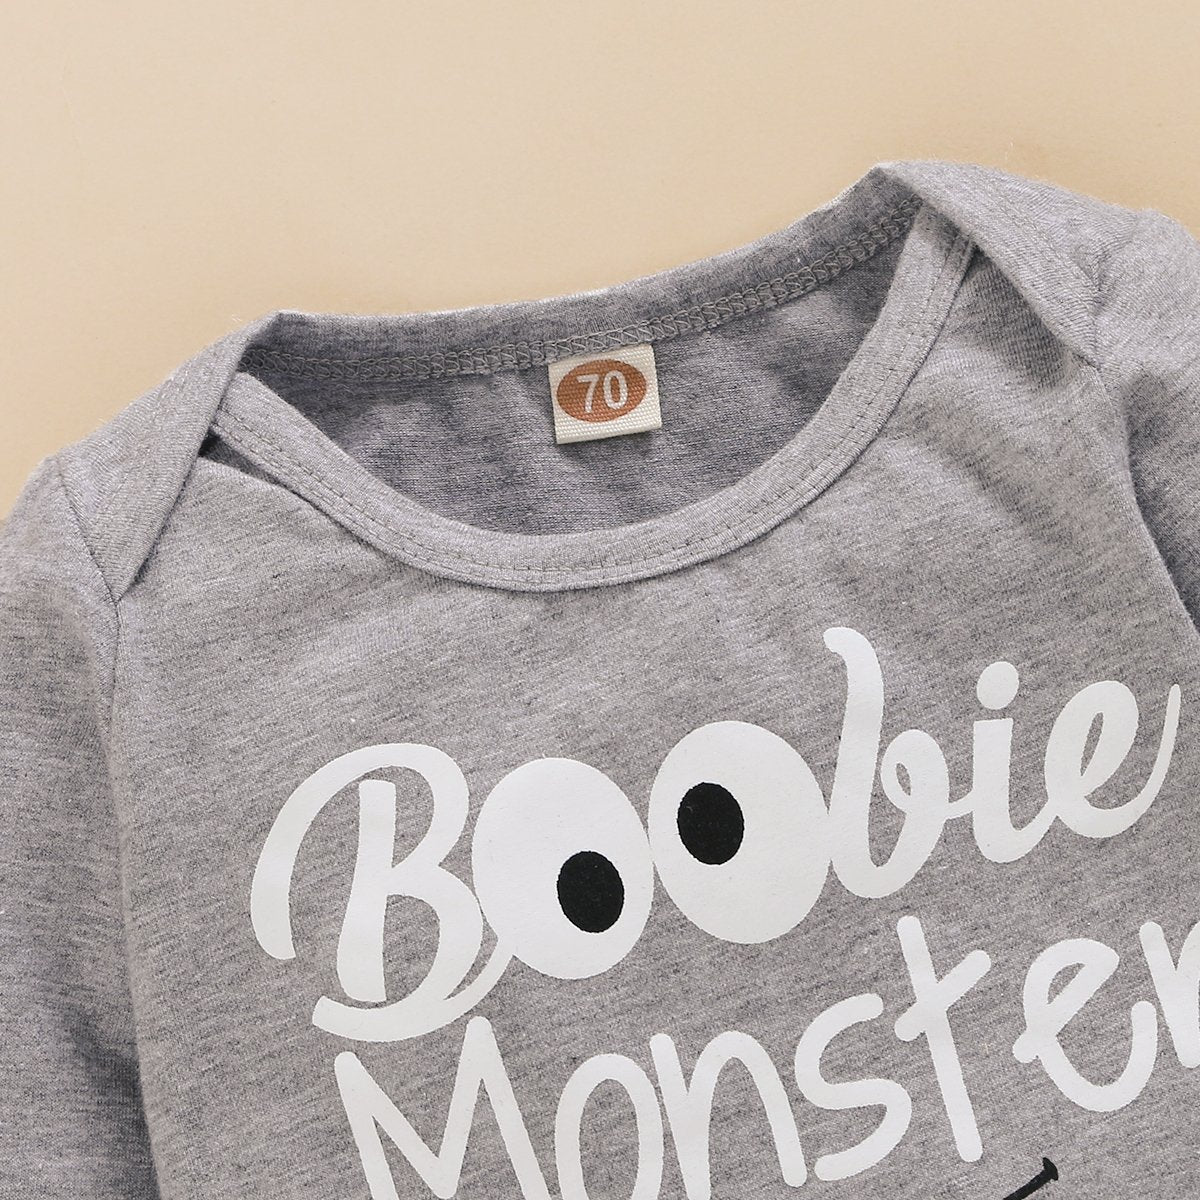 Boobie Monster Letter Printed Romper With Pants Baby Set